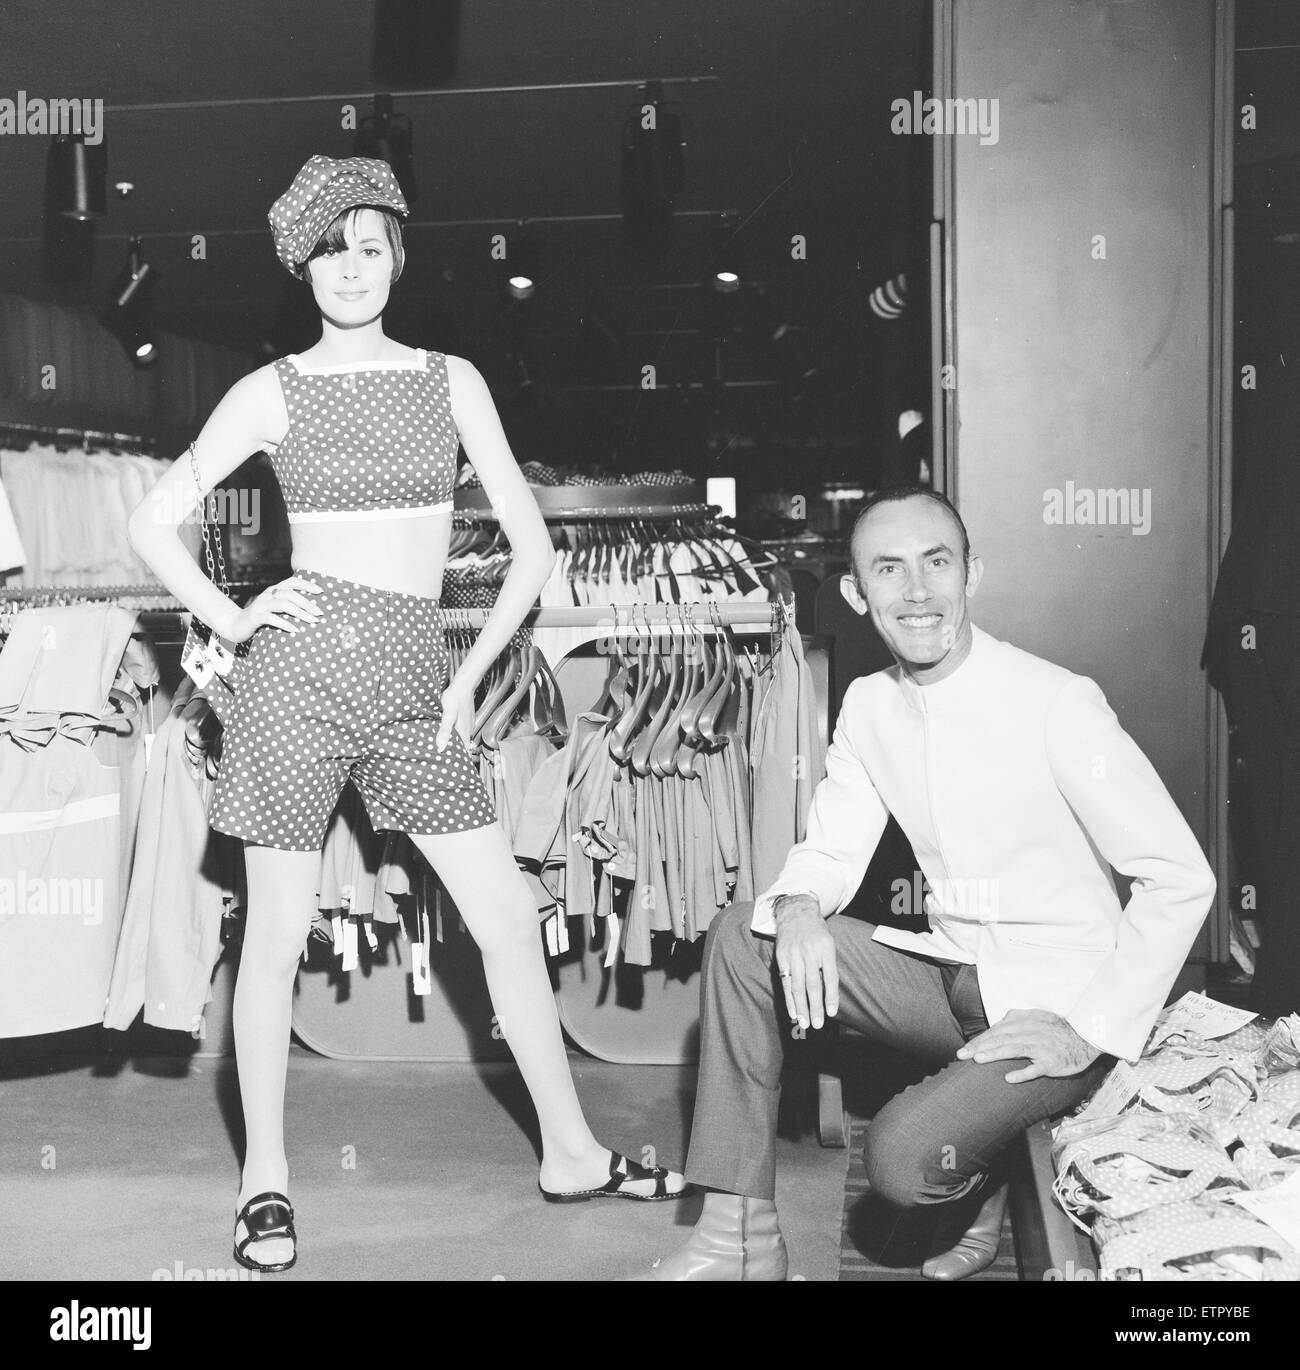 Way In the new unique 20,000 square foot boutique planned by Sir Hugh Fraser for the fourth floor of Harrods set to open on the 7th June 1967. Designer Ruben Torres who is putting on a show of his clothes is seen here with model Shoula Tevet wearing an outfit called 'Chocolate Chip'. 5th June 1967 Stock Photo